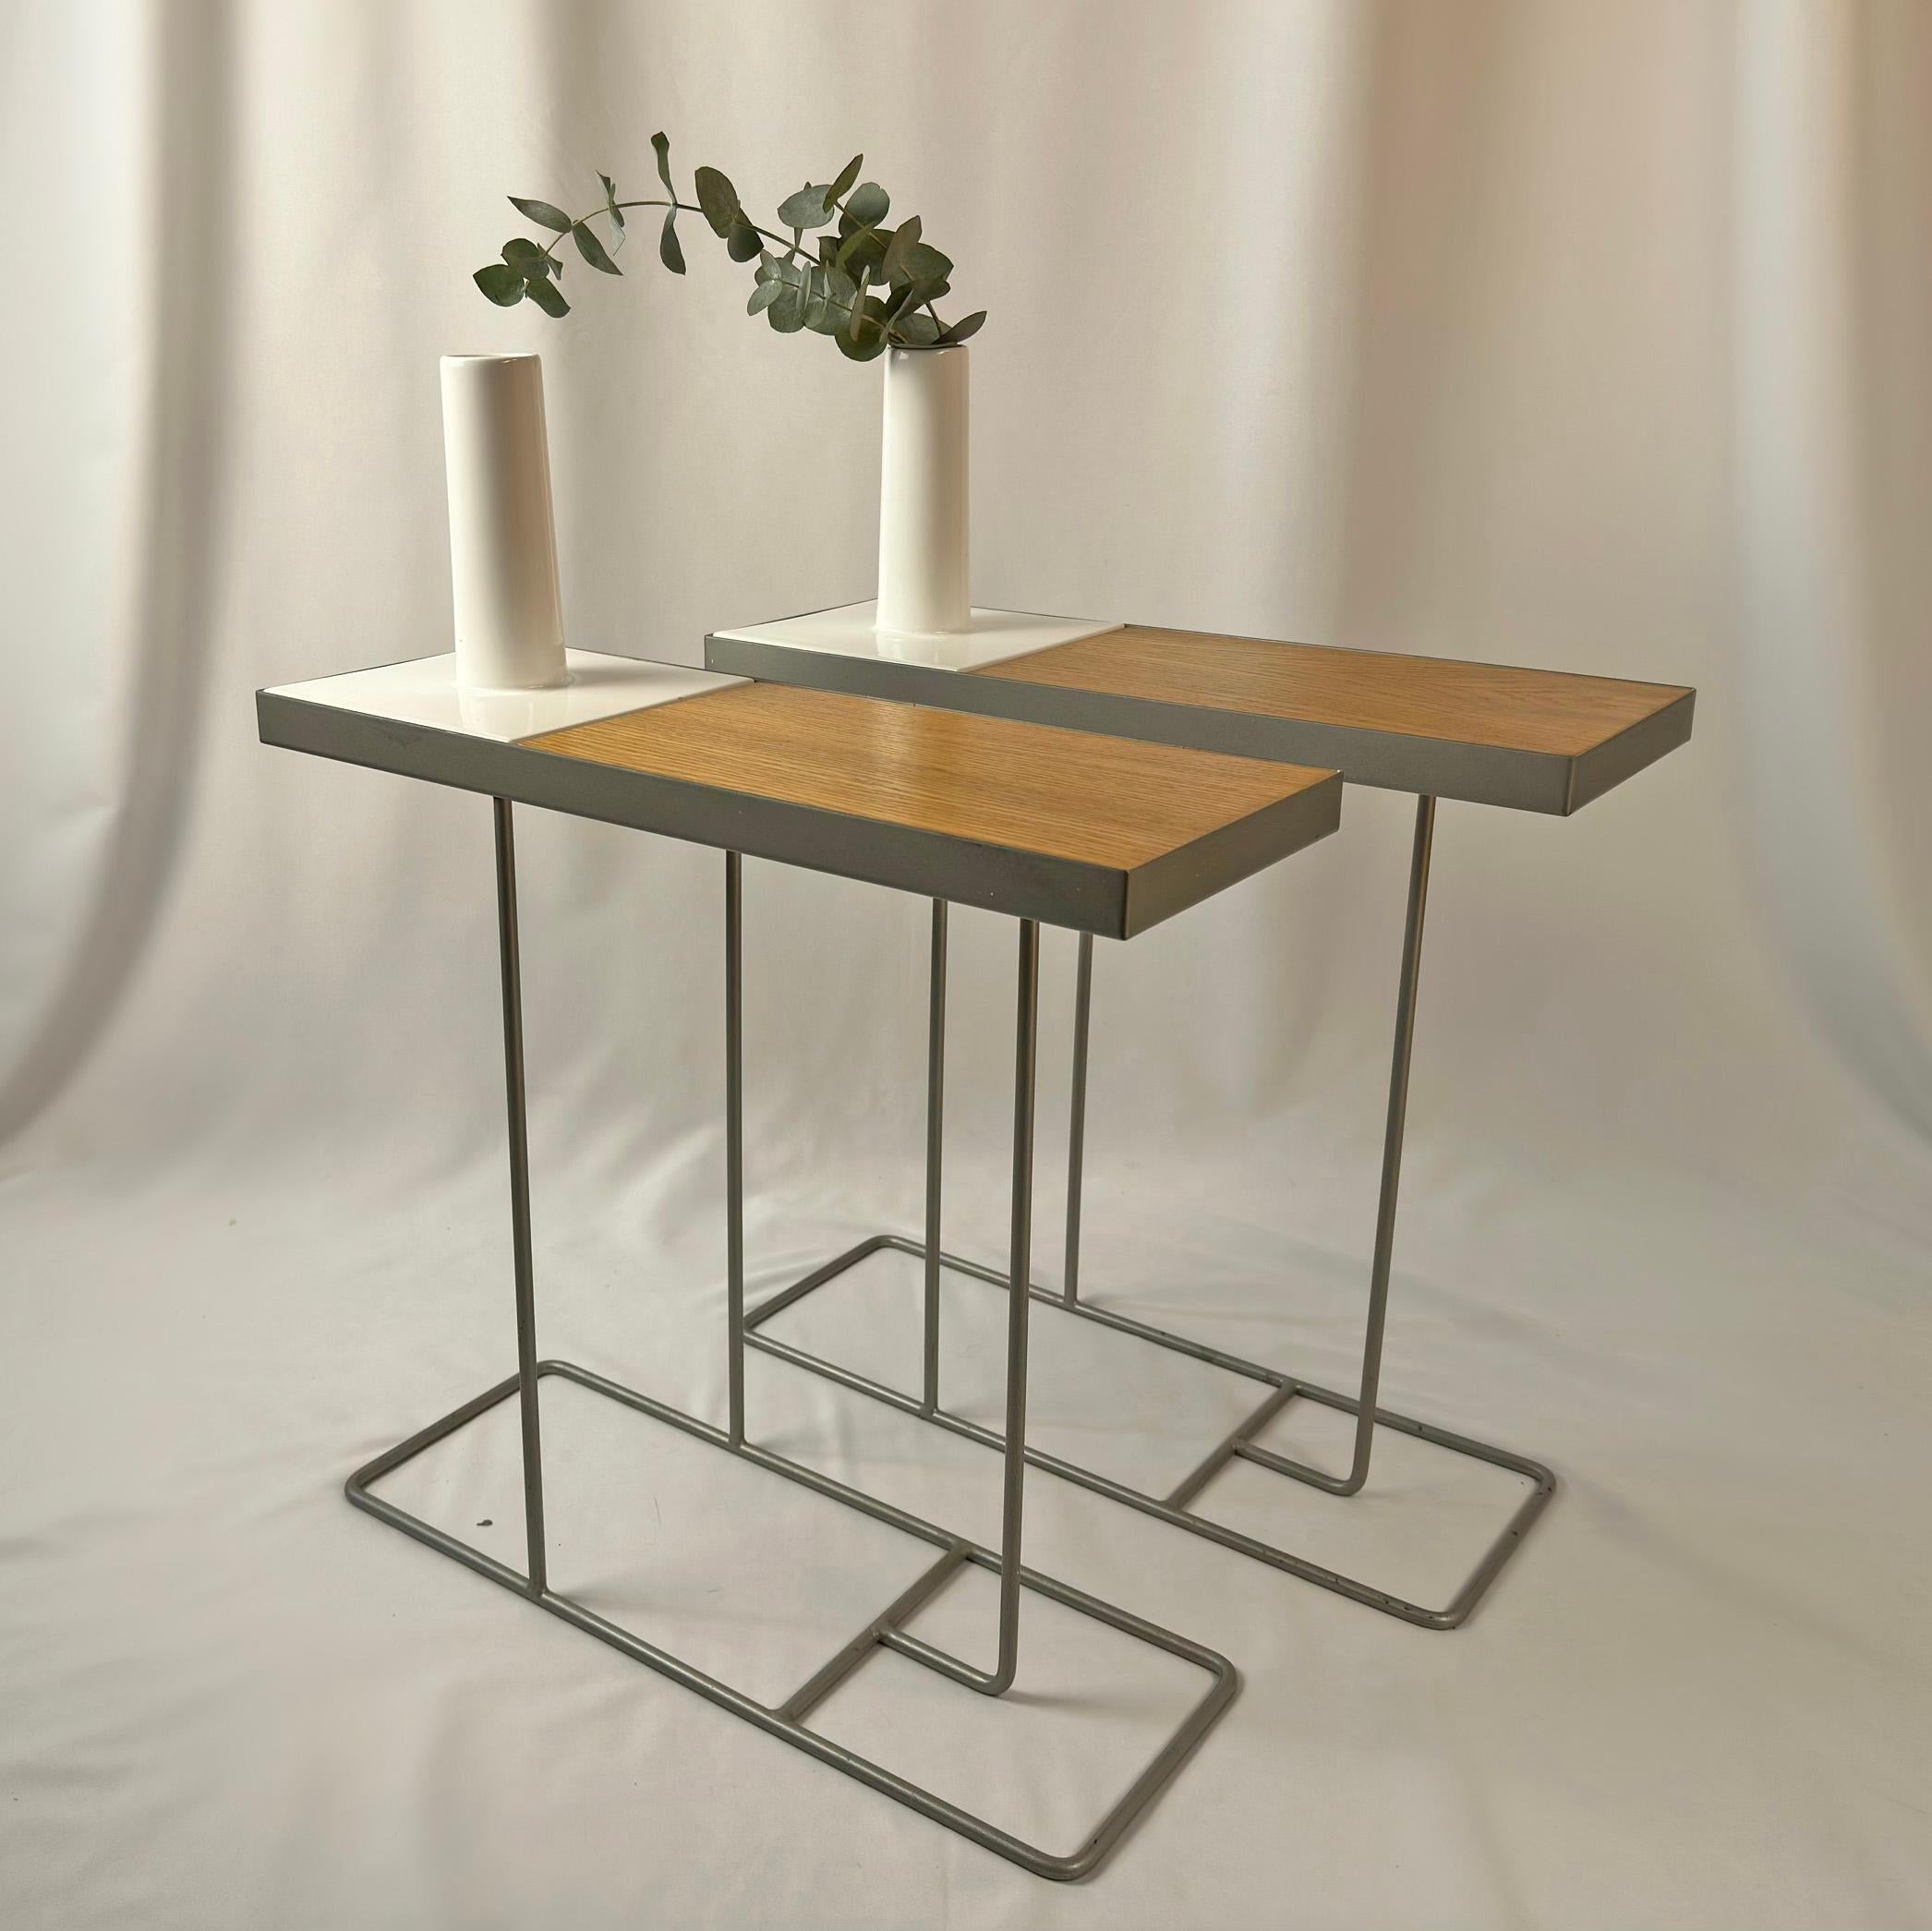 Introducing a pair of 'Iconic' Companion tables by the renowned designer Robin Day for Habitat. Originally designed in the mid-20th century, this timeless piece was re-issued in the 2000s with a modern twist, now featuring an elegant white ceramic